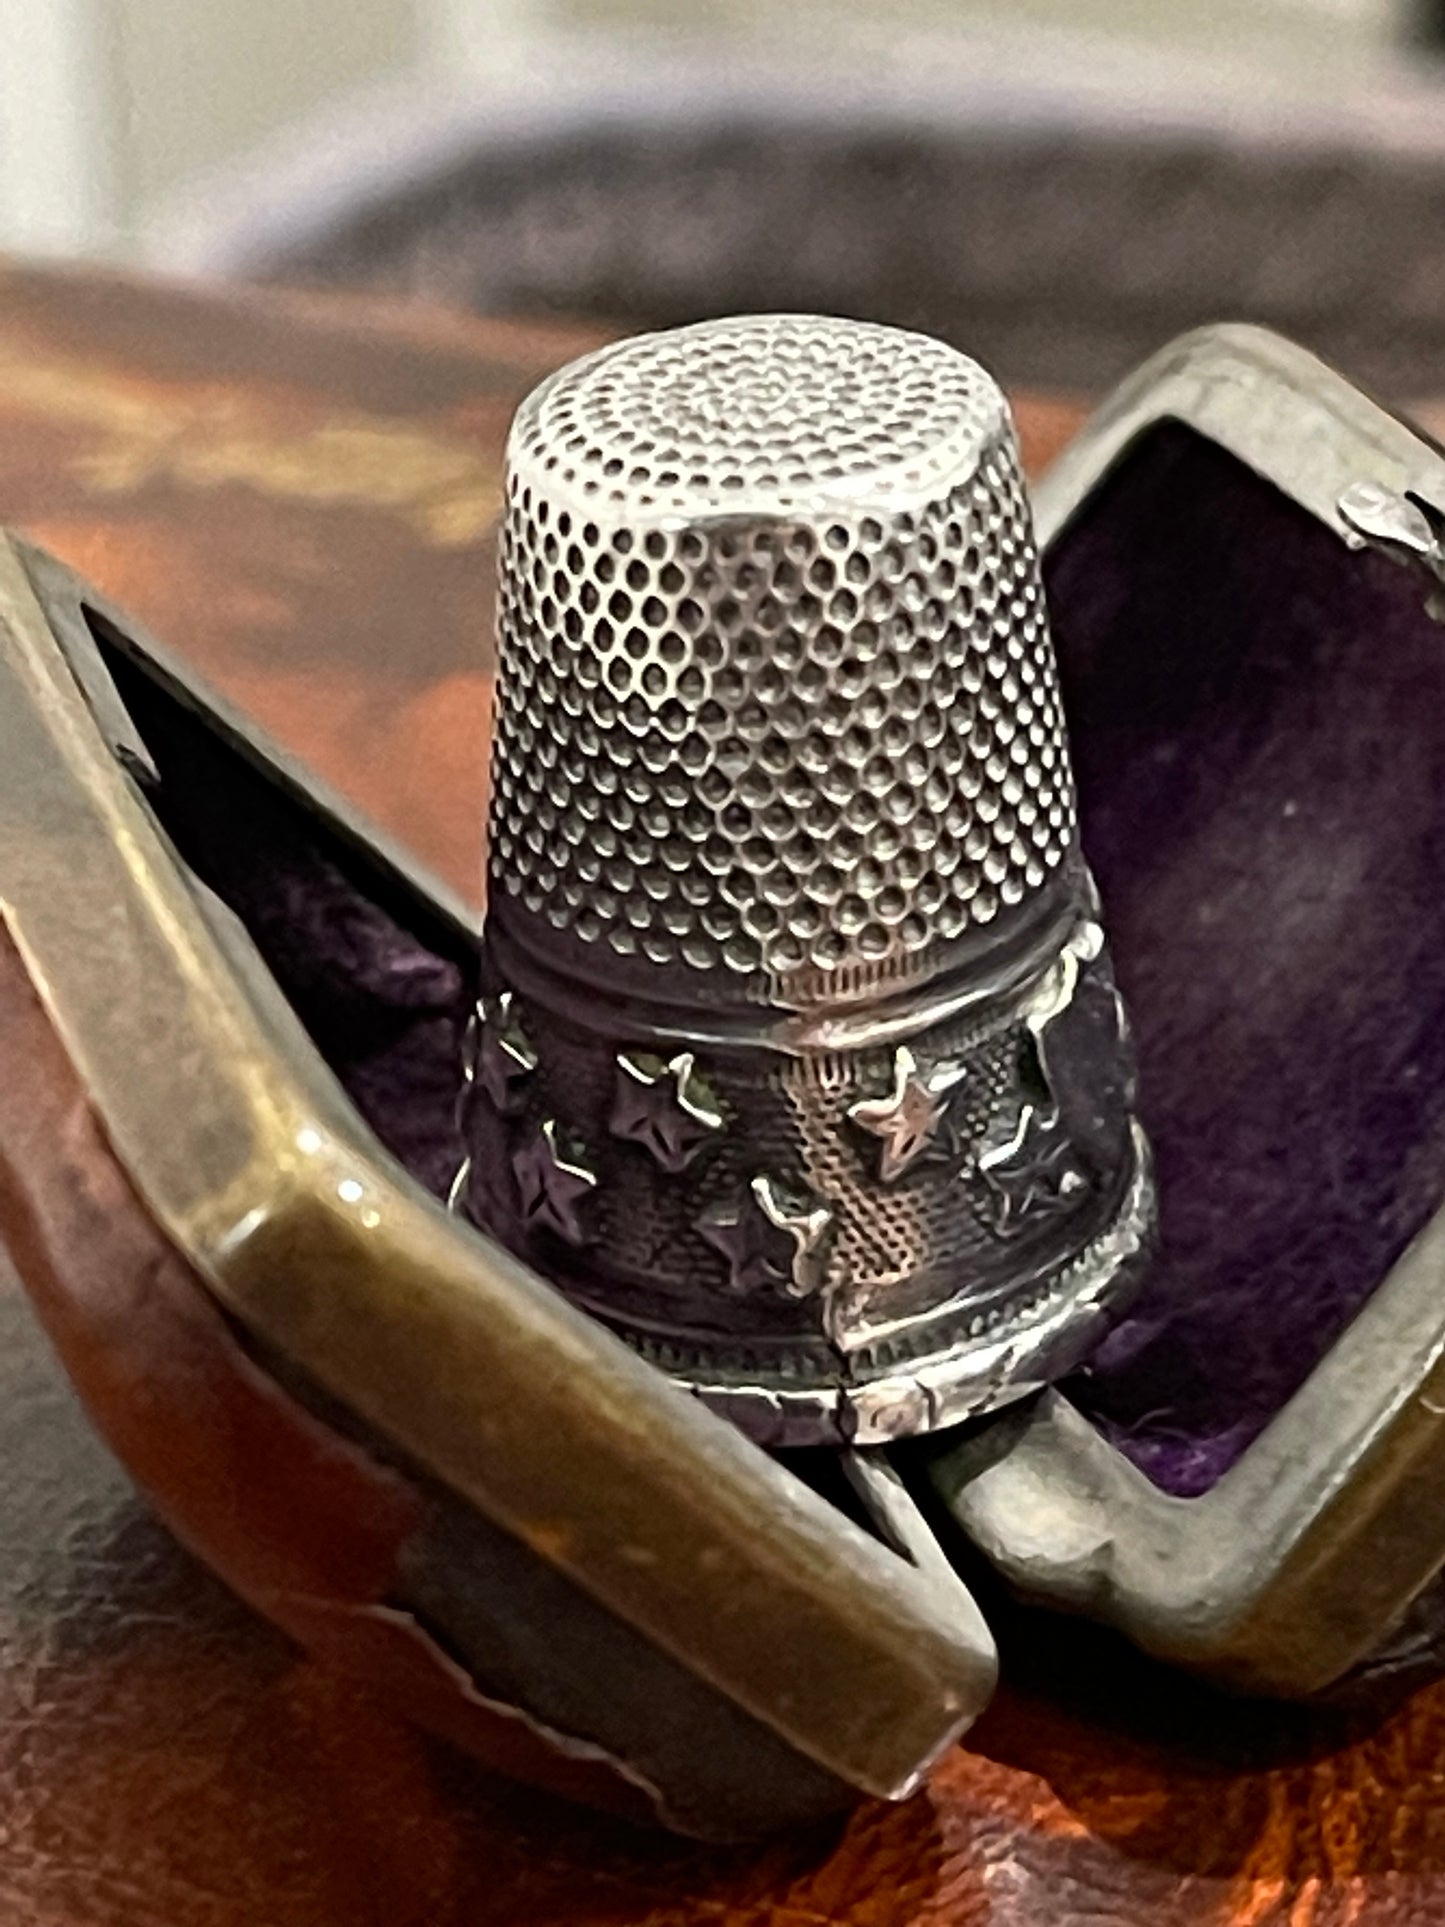 Souvenir thimble in a leather case - The White Barn Antiques